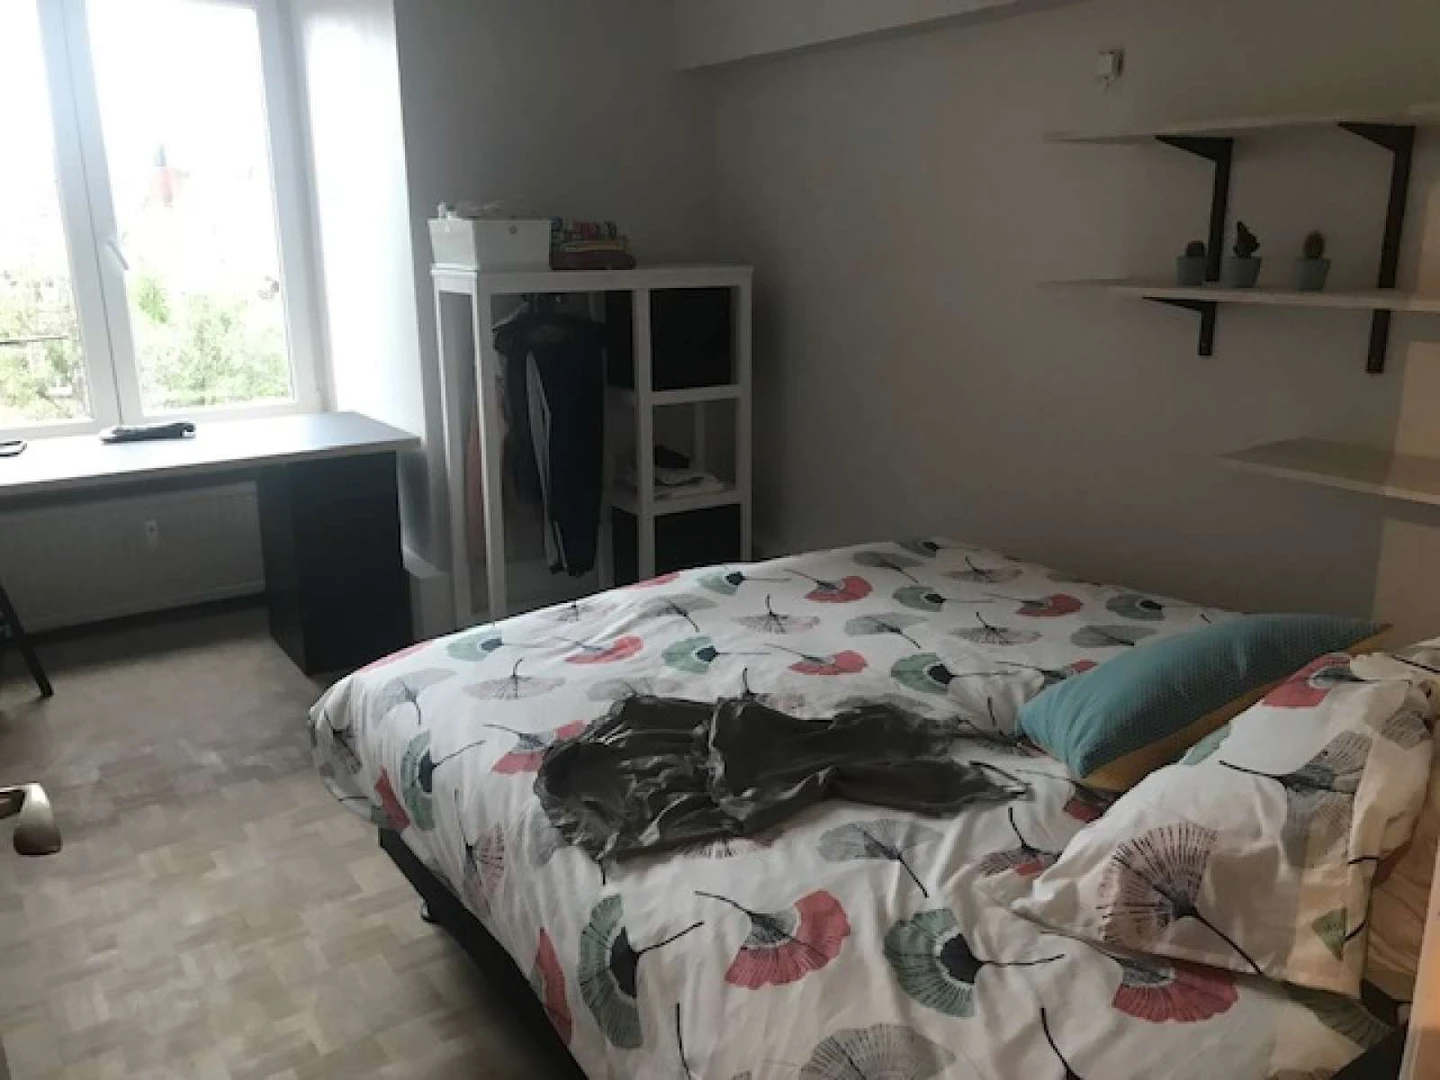 Cheap private room in gent